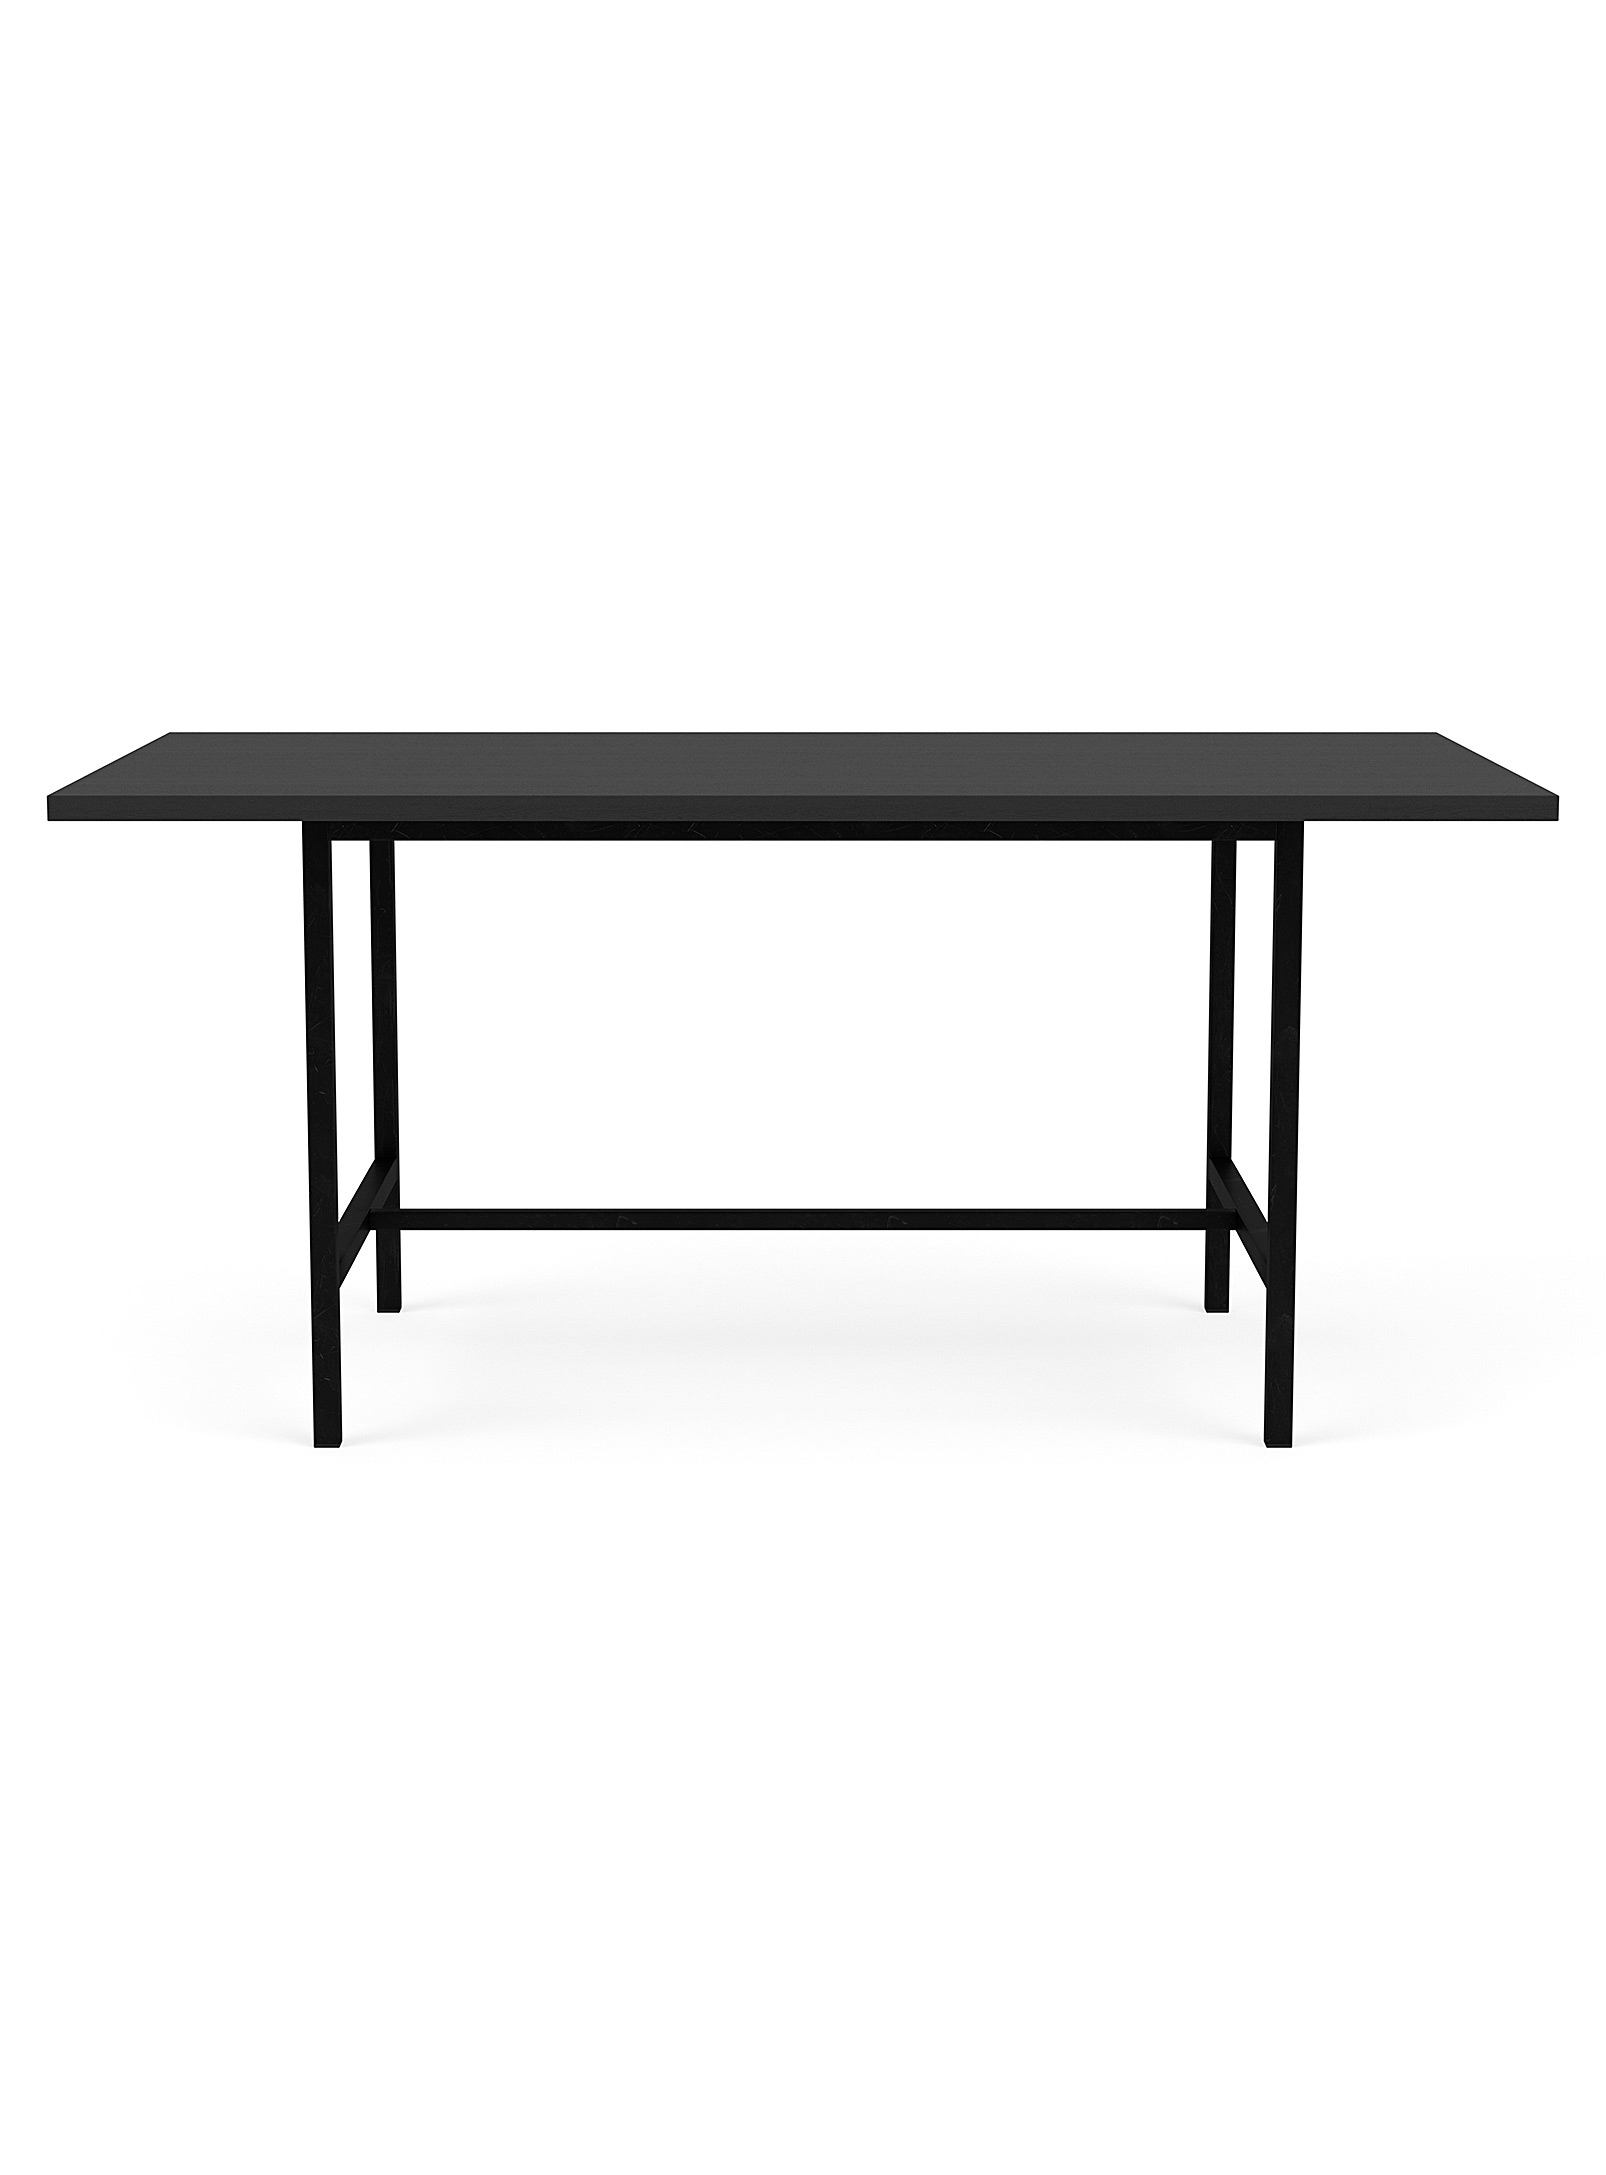 Eq3 Black Oak Dining Table Seats 4 To 6 People